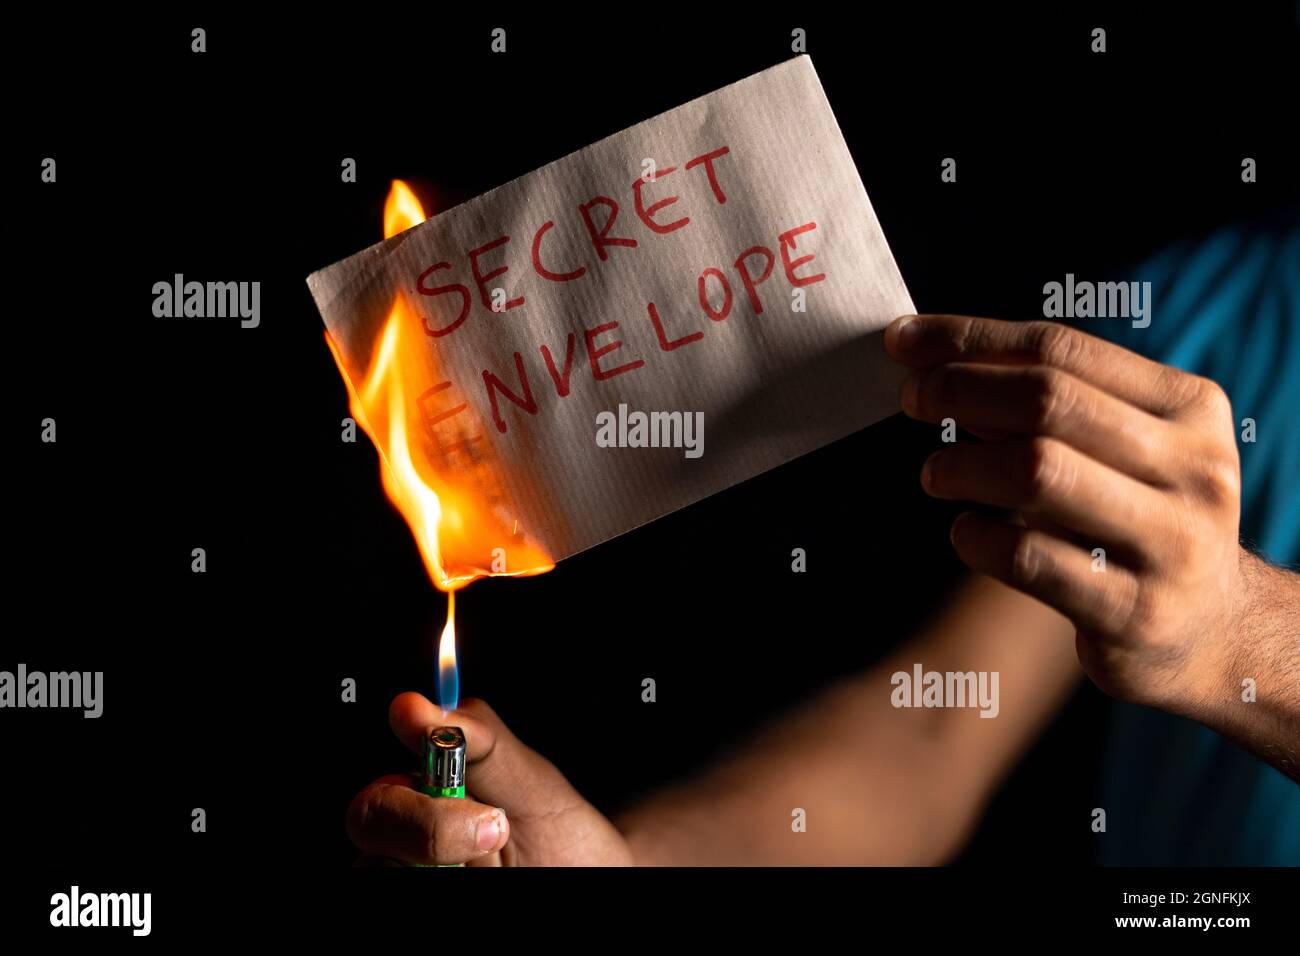 closeup shot of hands burning top-secret document or envelope - concept of illegally destroying evidence and erasing documents. Stock Photo